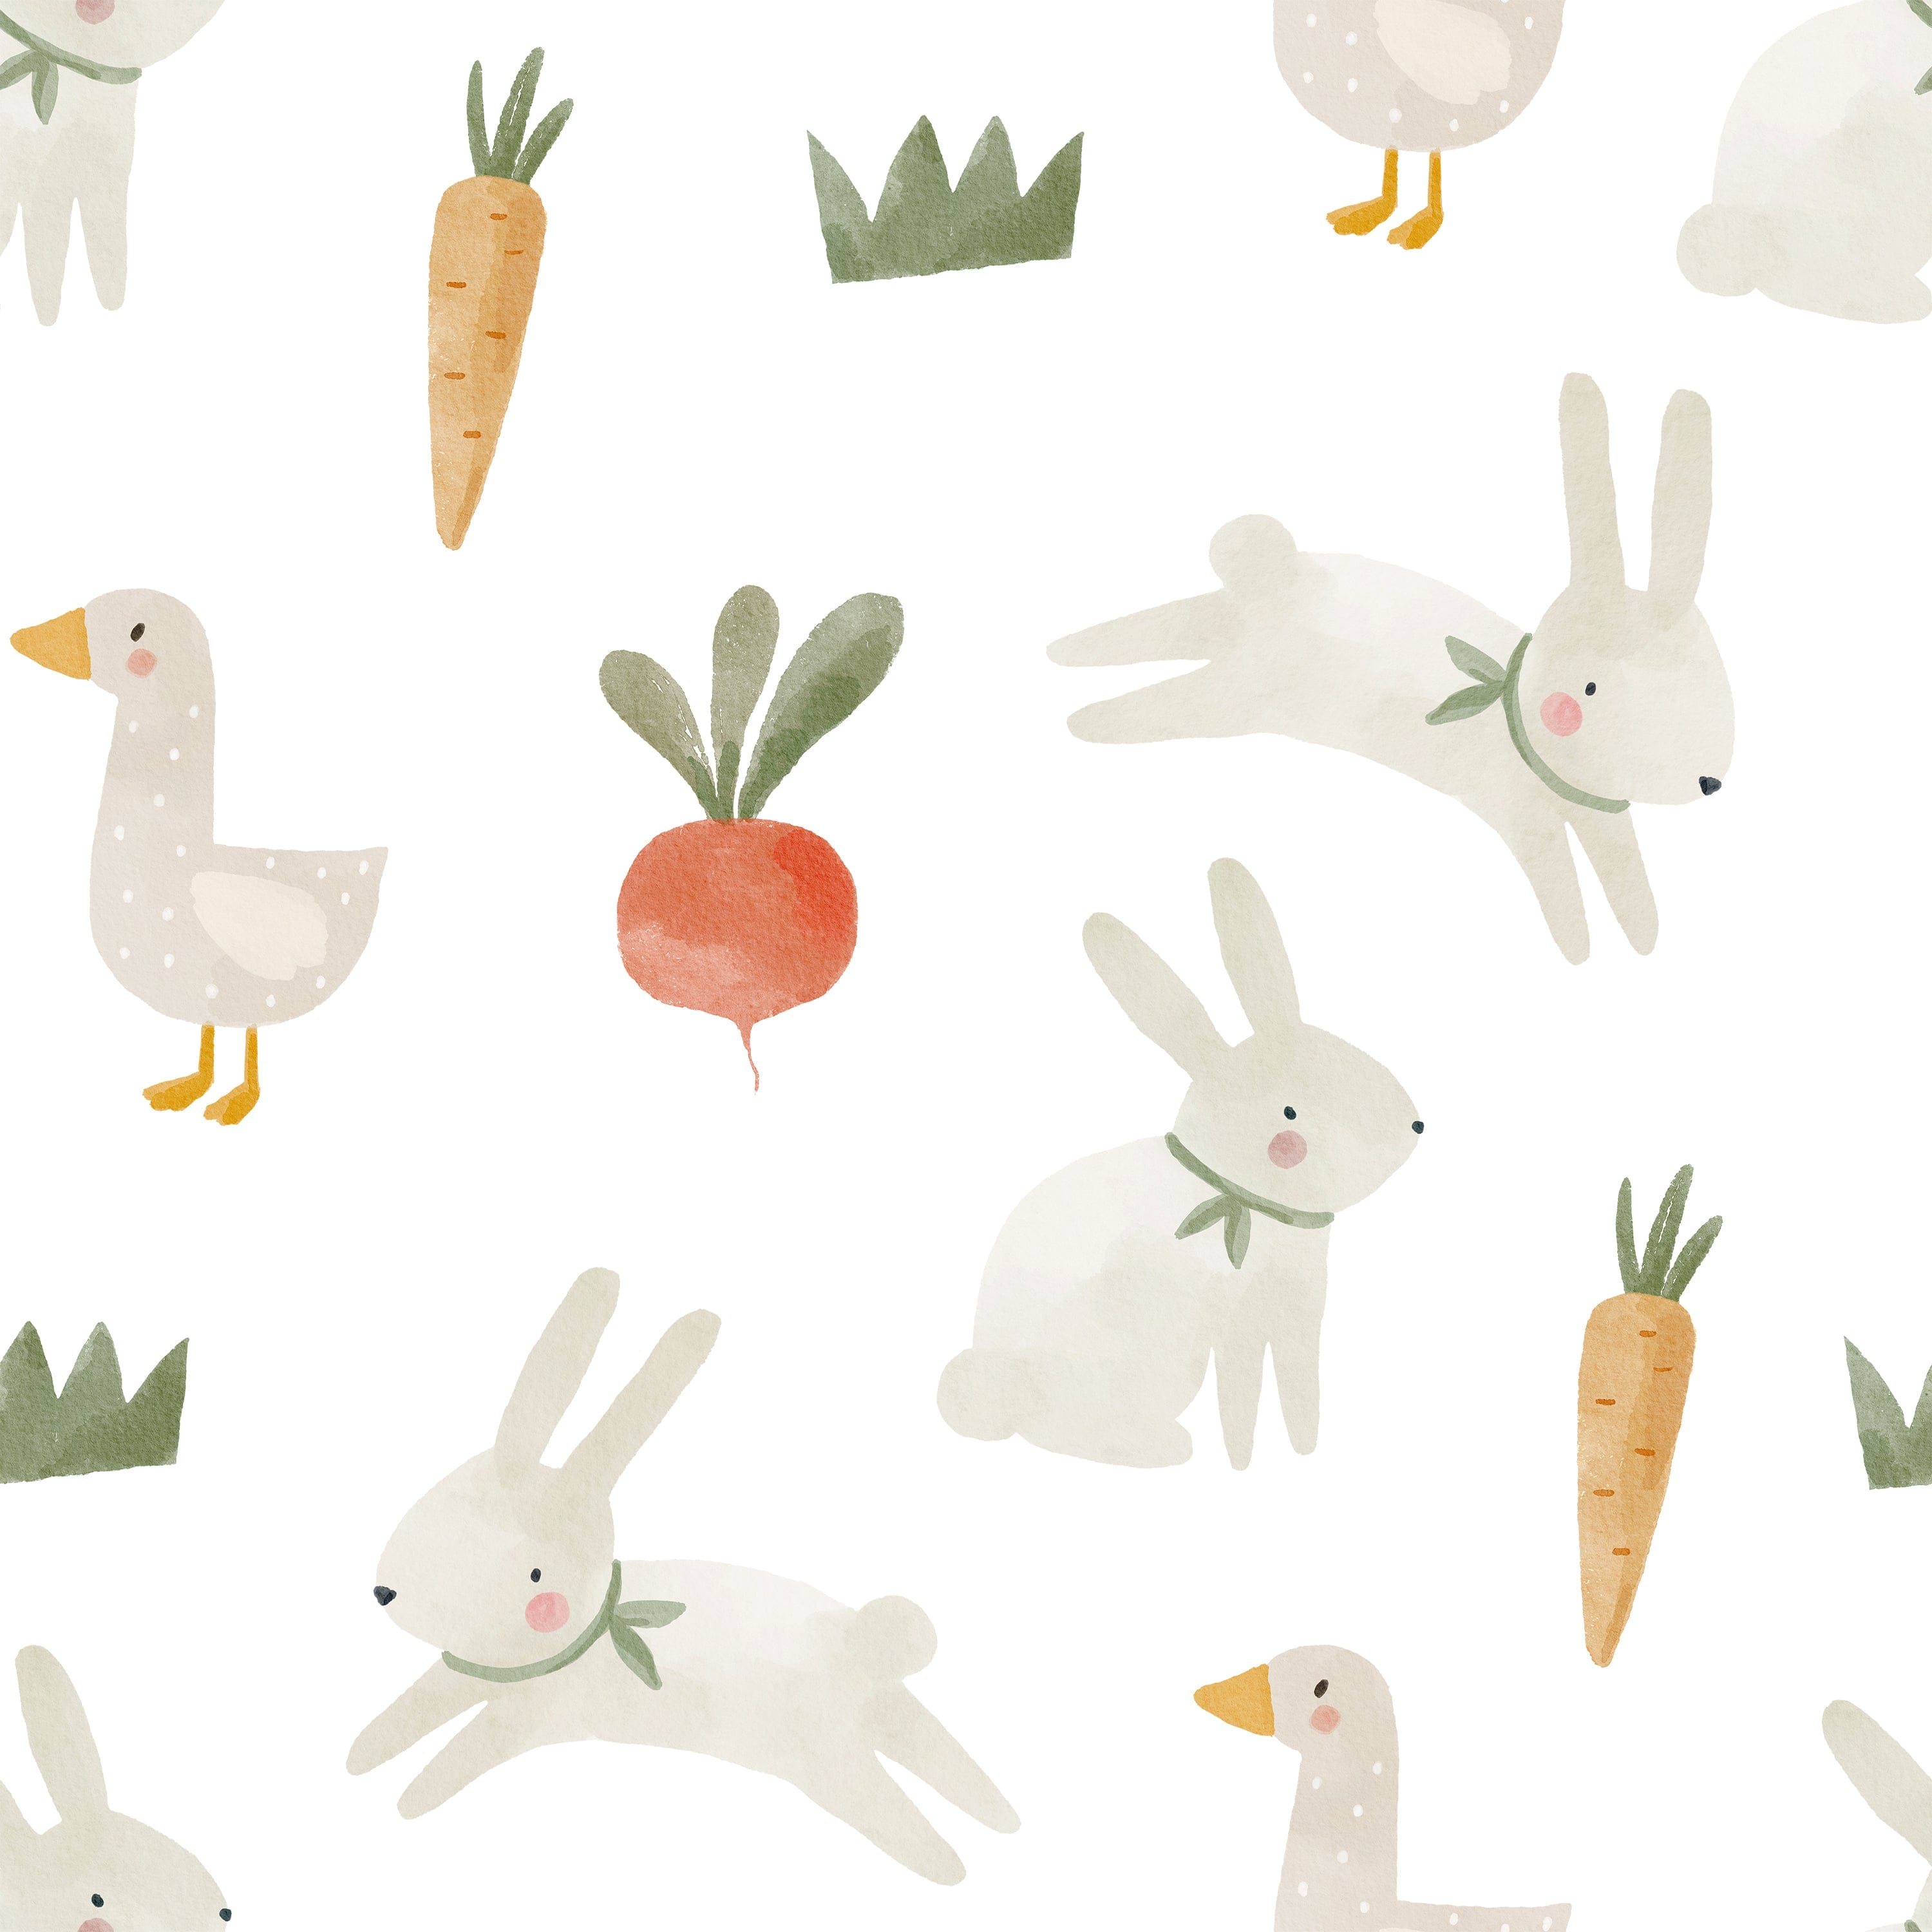 A seamless pattern of Farm Friend Wallpaper - Happy Bunnies, showcasing charming hand-drawn bunnies, geese, carrots, radishes, and grass on a white background.